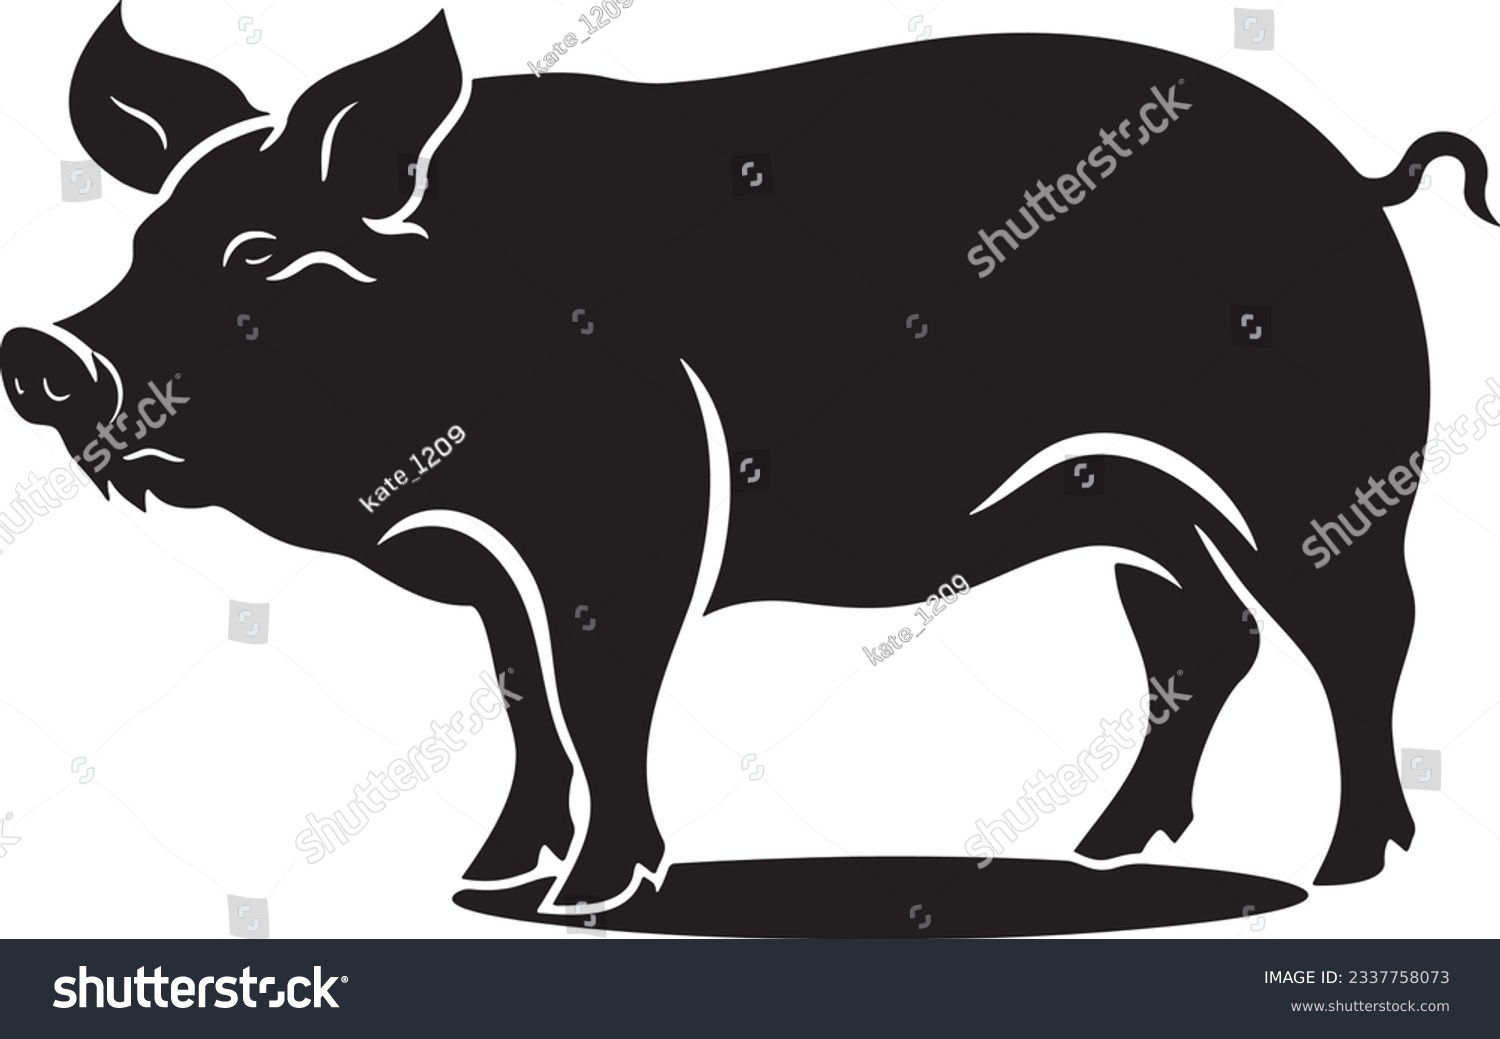 SVG of Swine with curly tail, Basic simple Minimalist vector graphic, isolated on white background, black and white svg